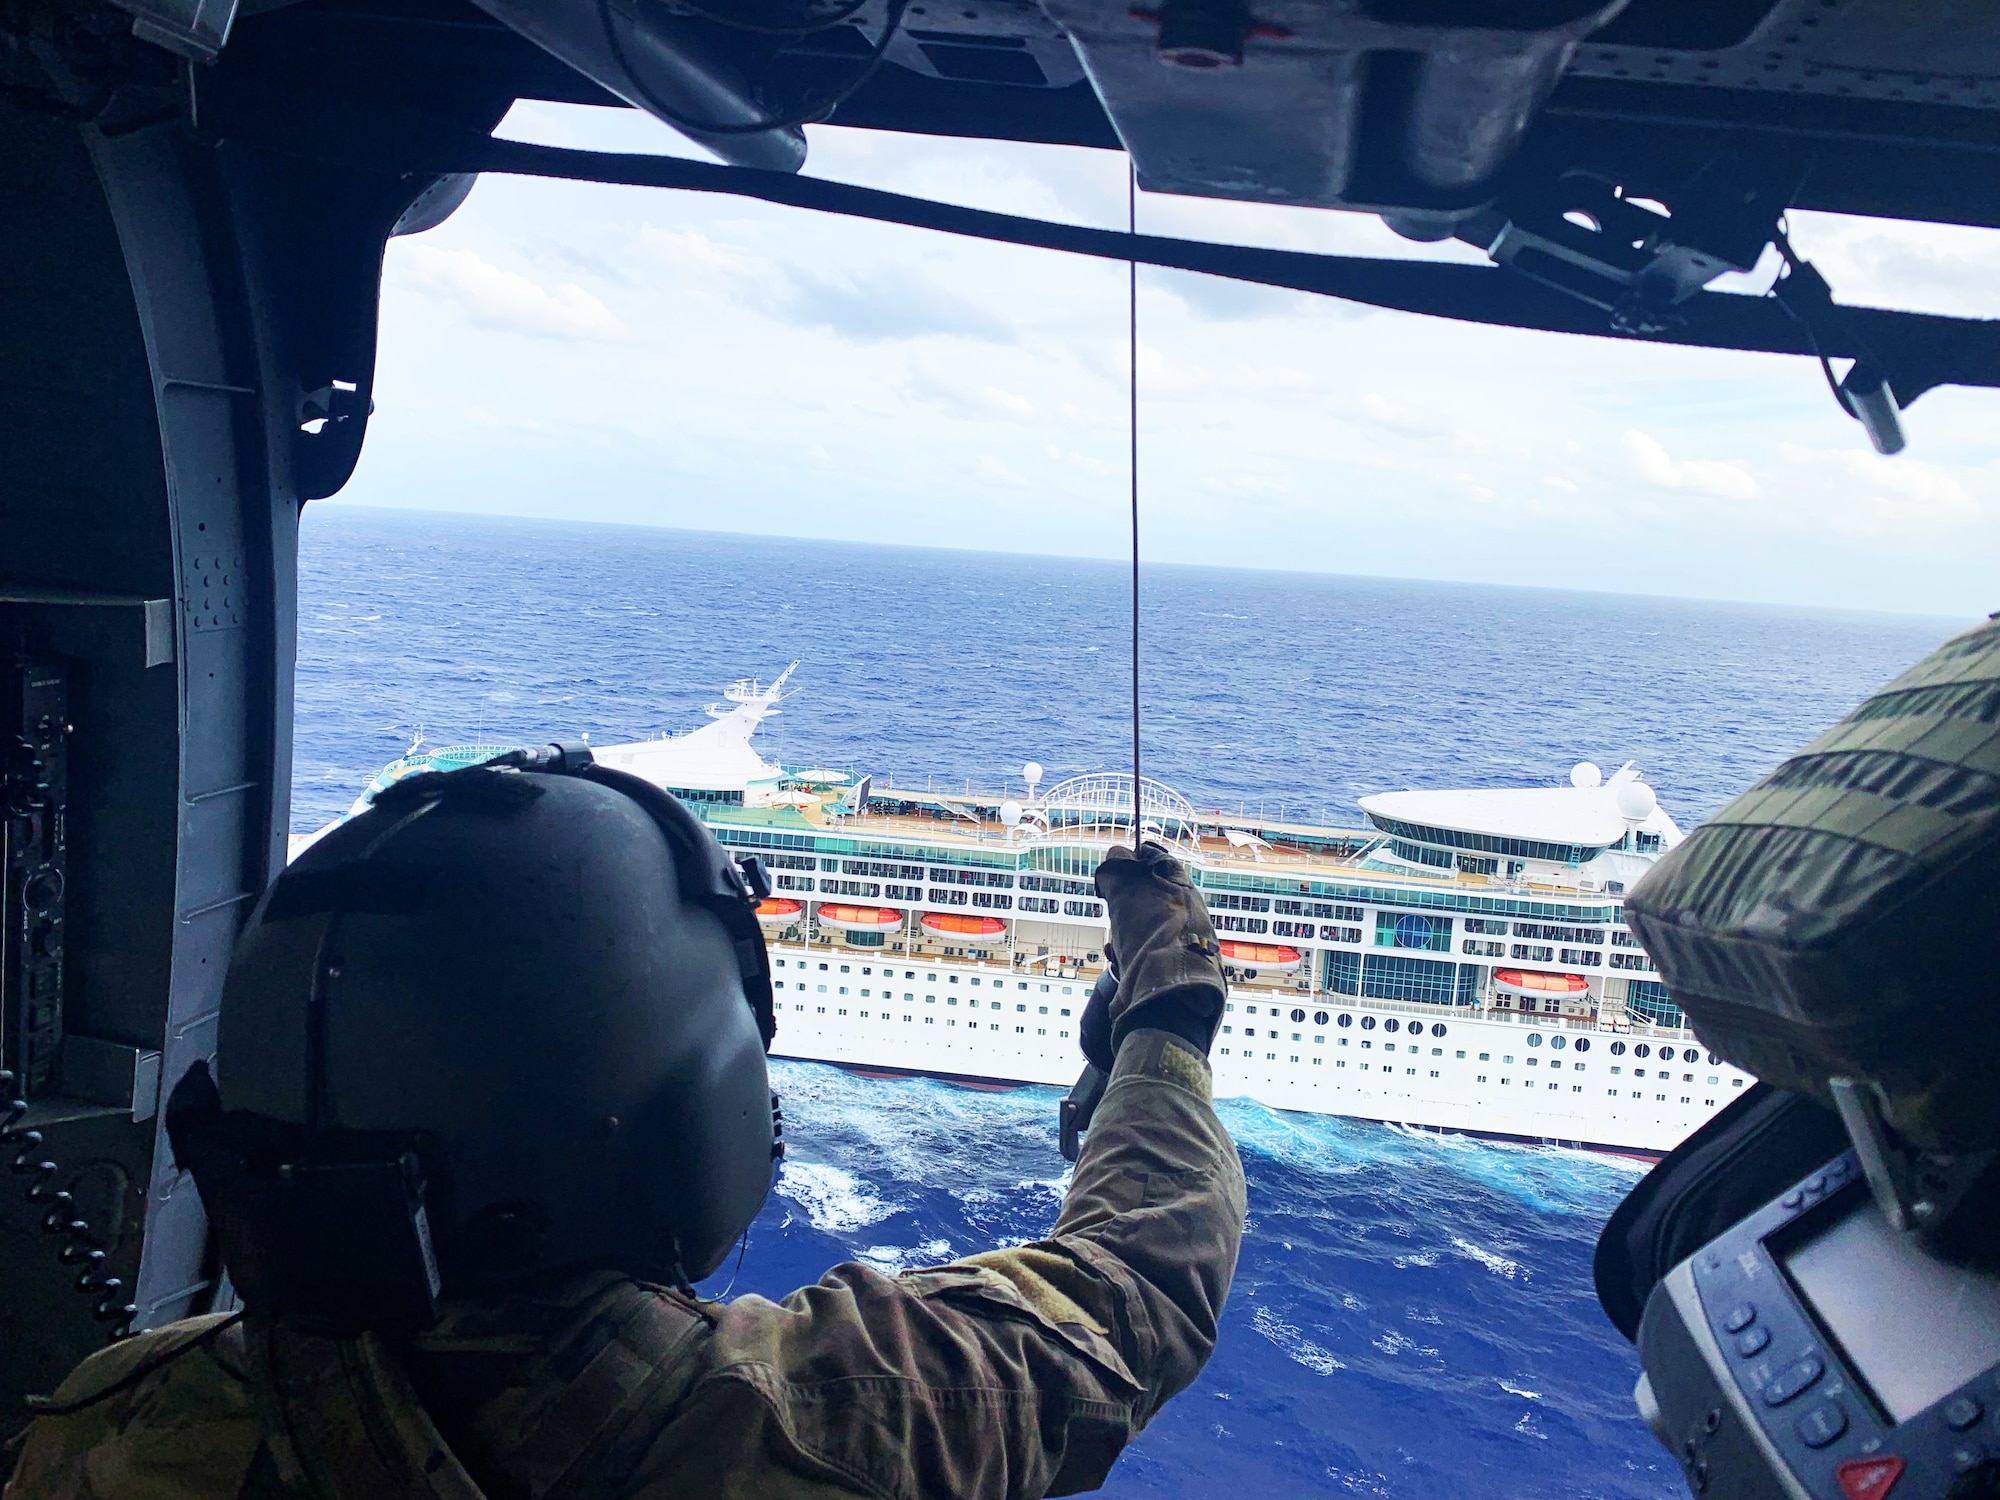 The 920th Rescue Wing conducted a medical airlift in support of a critically injured person aboard a cruise ship 600 nautical miles off the coast of Florida, Feb. 15, 2022. The mission, carried out by two HH-60G Pave Hawk helicopters, two-C-130J Combat King II aircraft and pararescuemen, required three air-to-air refuelings to reach the ship’s remote location. The rescue mission covered just under 1,100 miles round trip over open ocean and was completed in eight hours. (Courtesy photo)